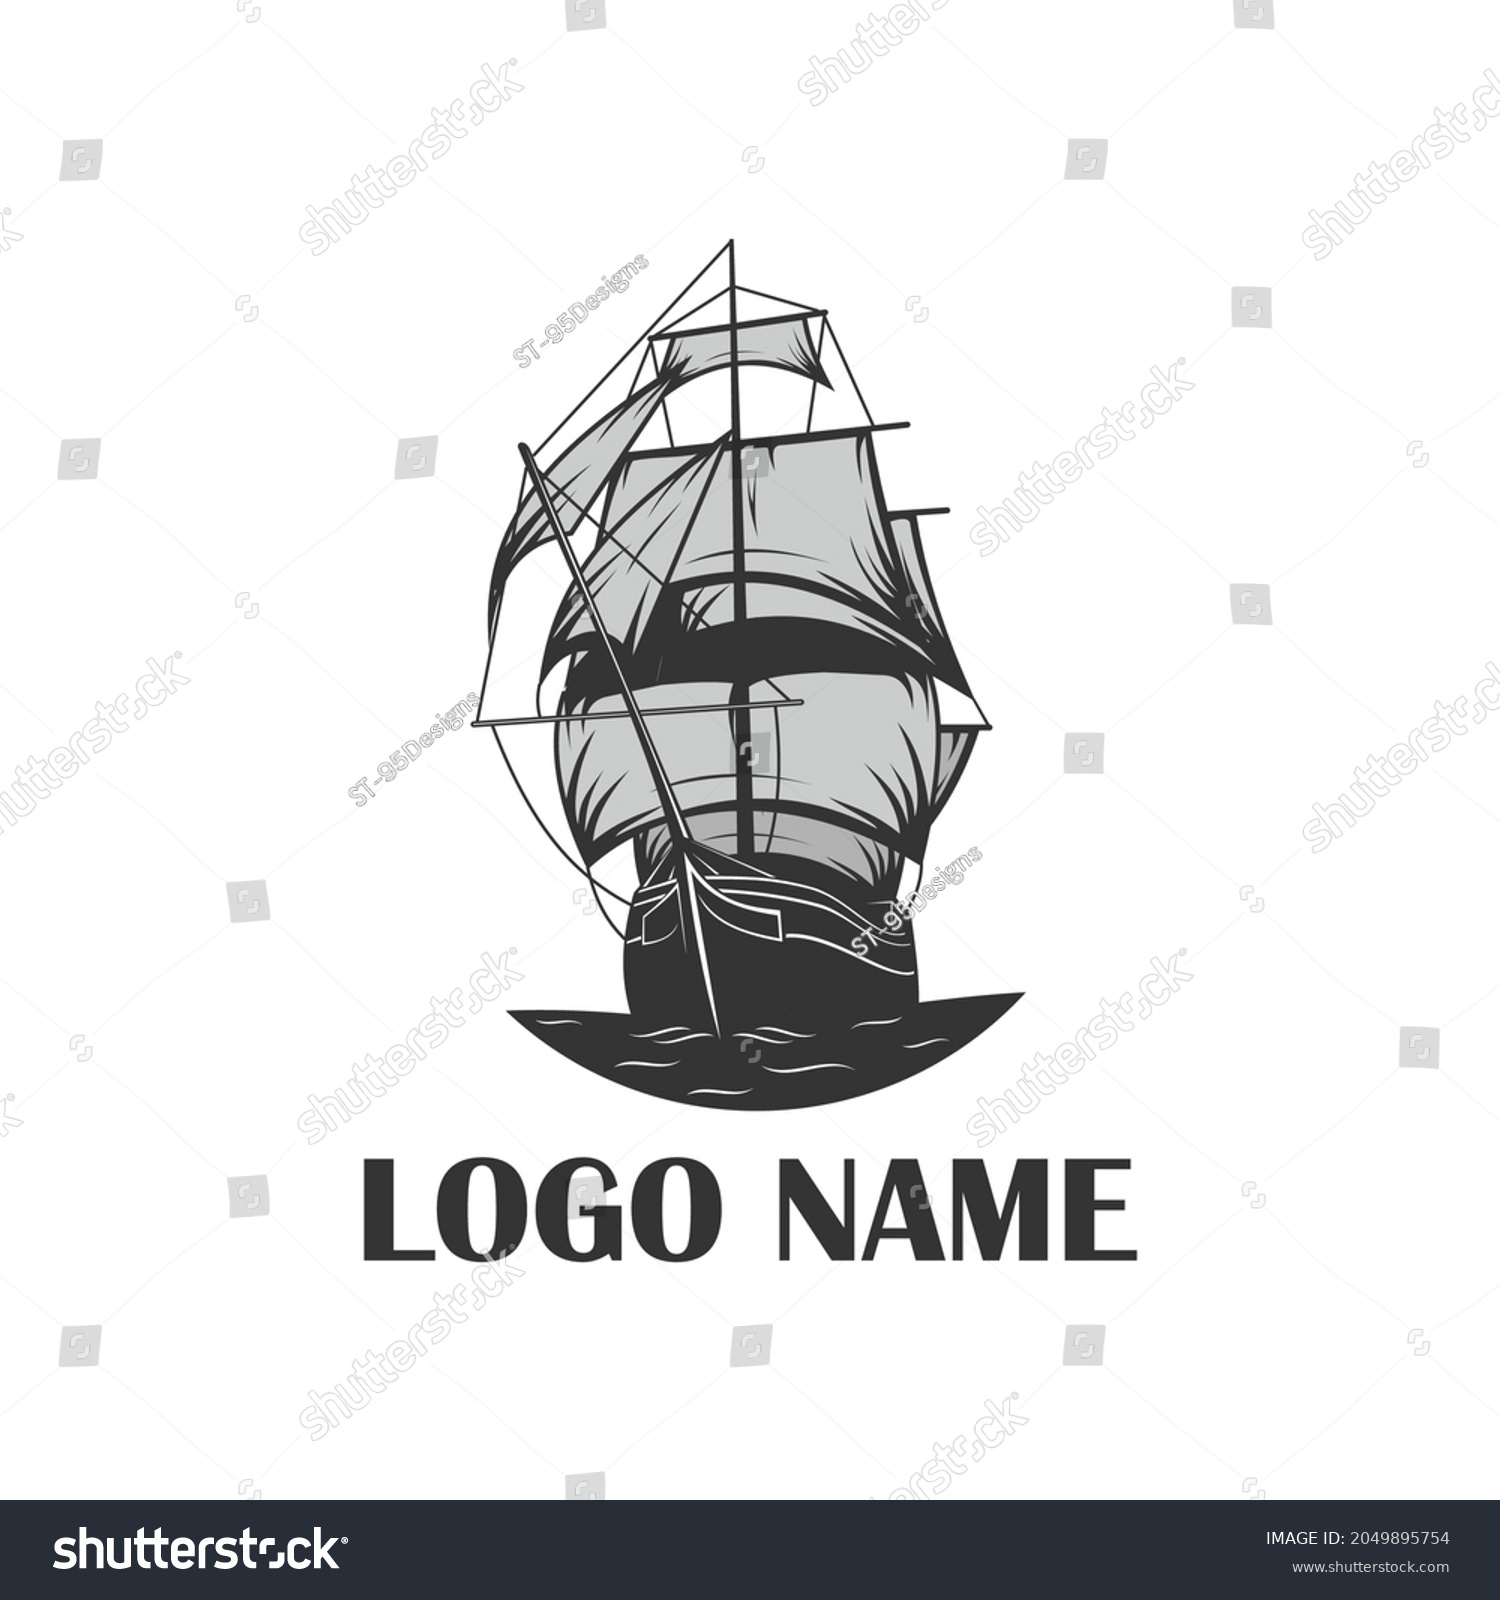 SVG of sailing ship logo template black and white svg